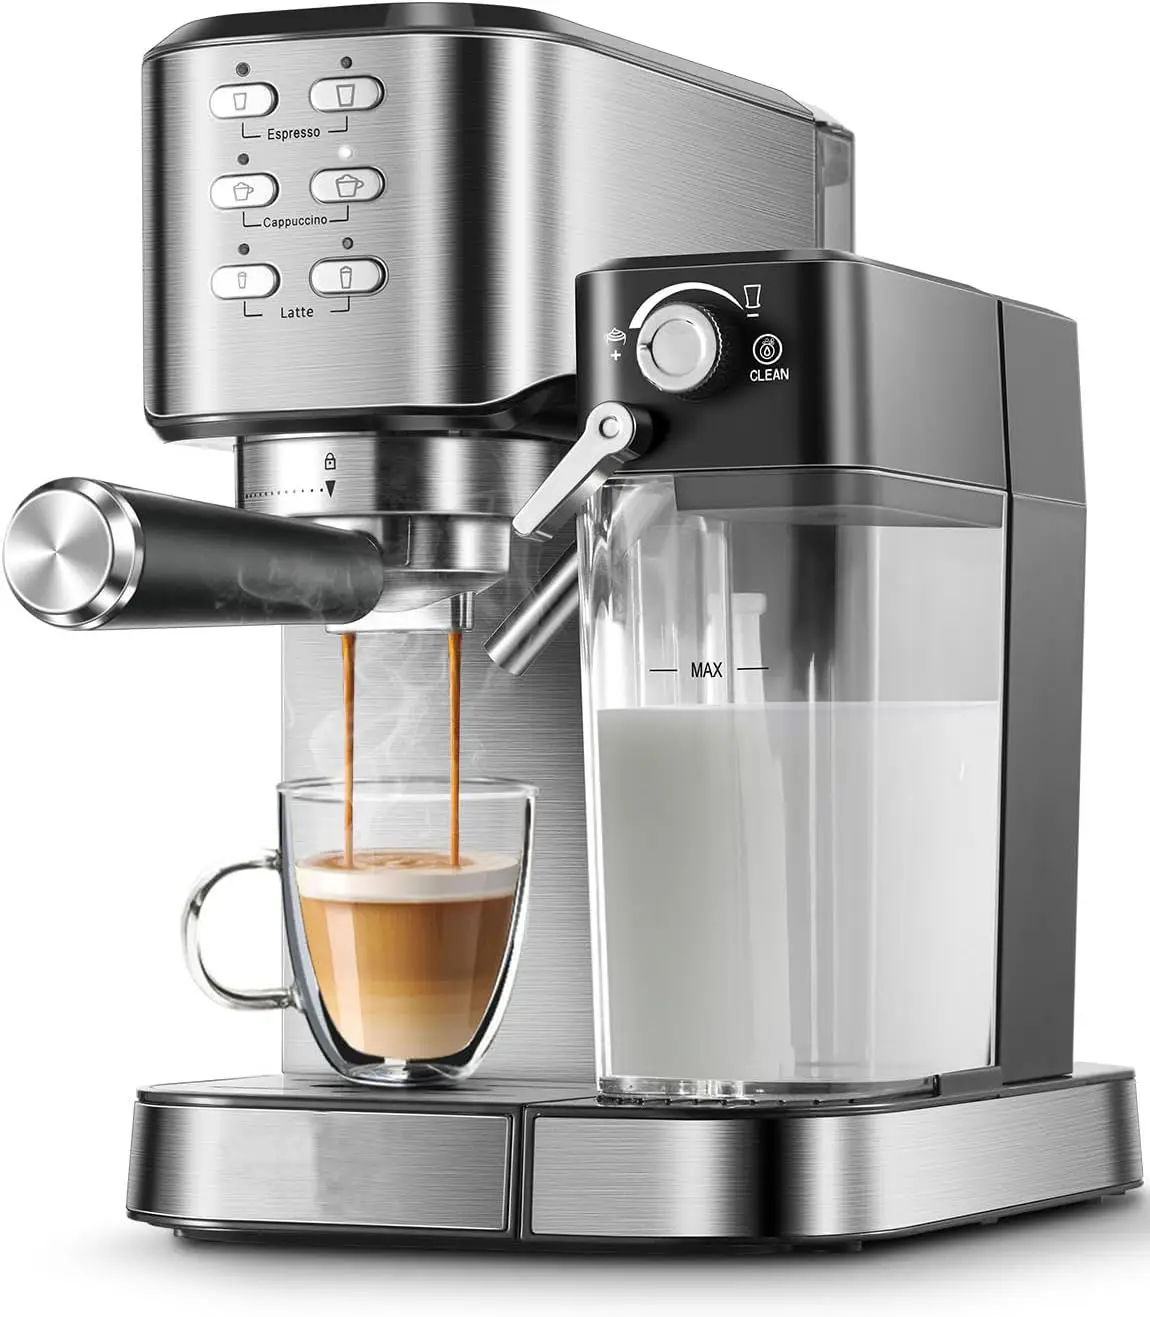 6-in-1 Espresso Coffee Machine Built-In Automatic Milk Frother, Espresso & Cappuccino & Latte Maker with Removable water tank